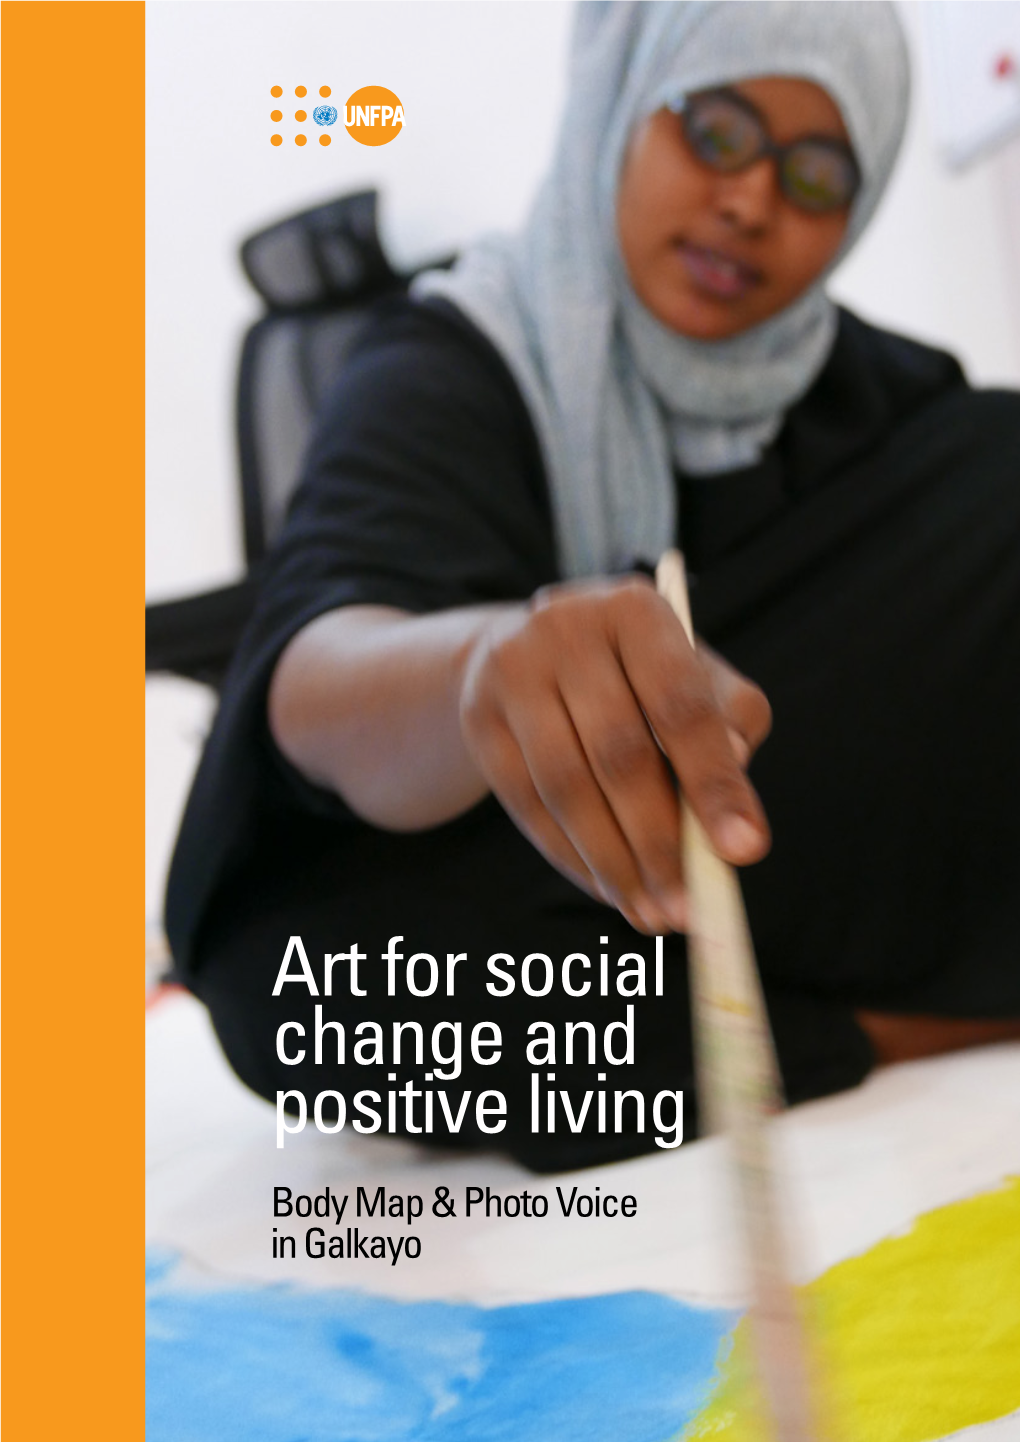 Art for Social Change and Positive Living Body Map & Photo Voice in Galkayo All Rights Reserved